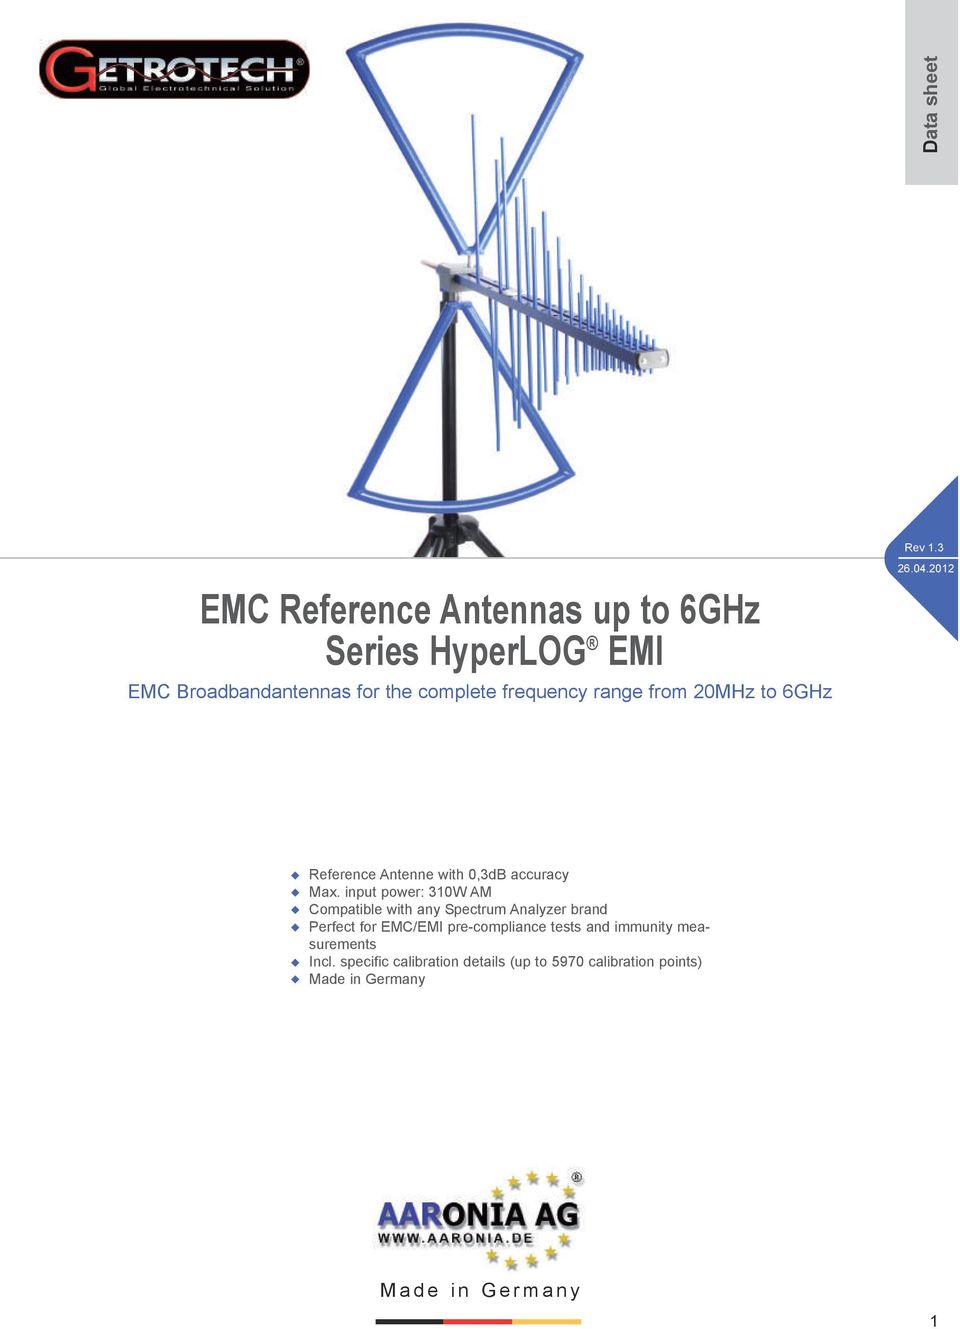 Spectrum Analyzer brand Perfect for EMC/EMI pre-compliance tests and immunity measurements